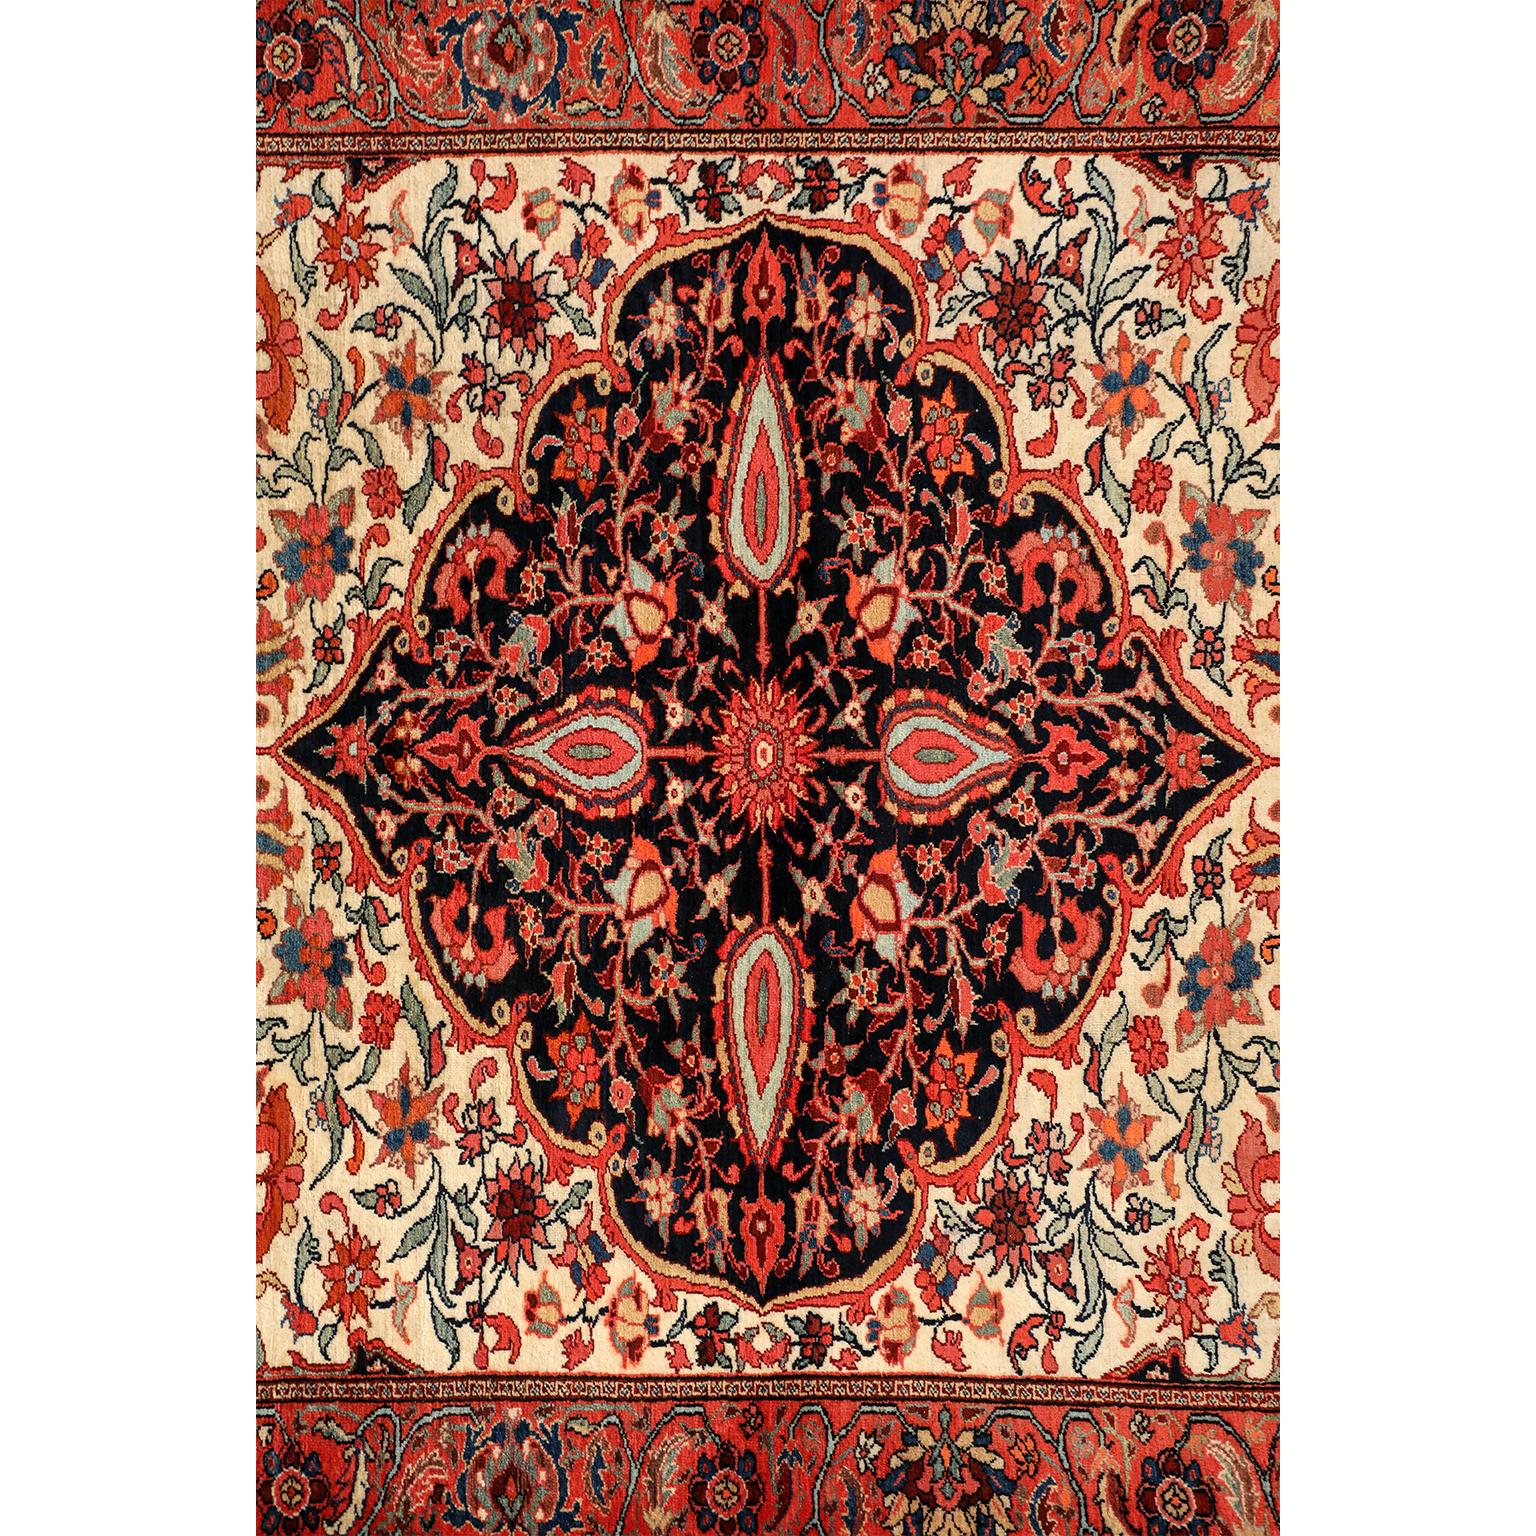 This antique Persian Meeshan Malayer carpet circa 1900 in pure wool and vegetable dyes consists of a hand-knotted handspun pure wool pile, cotton warp, and wool weft. A four-pointed medallion anchors the design, symbolizing the four natural elements